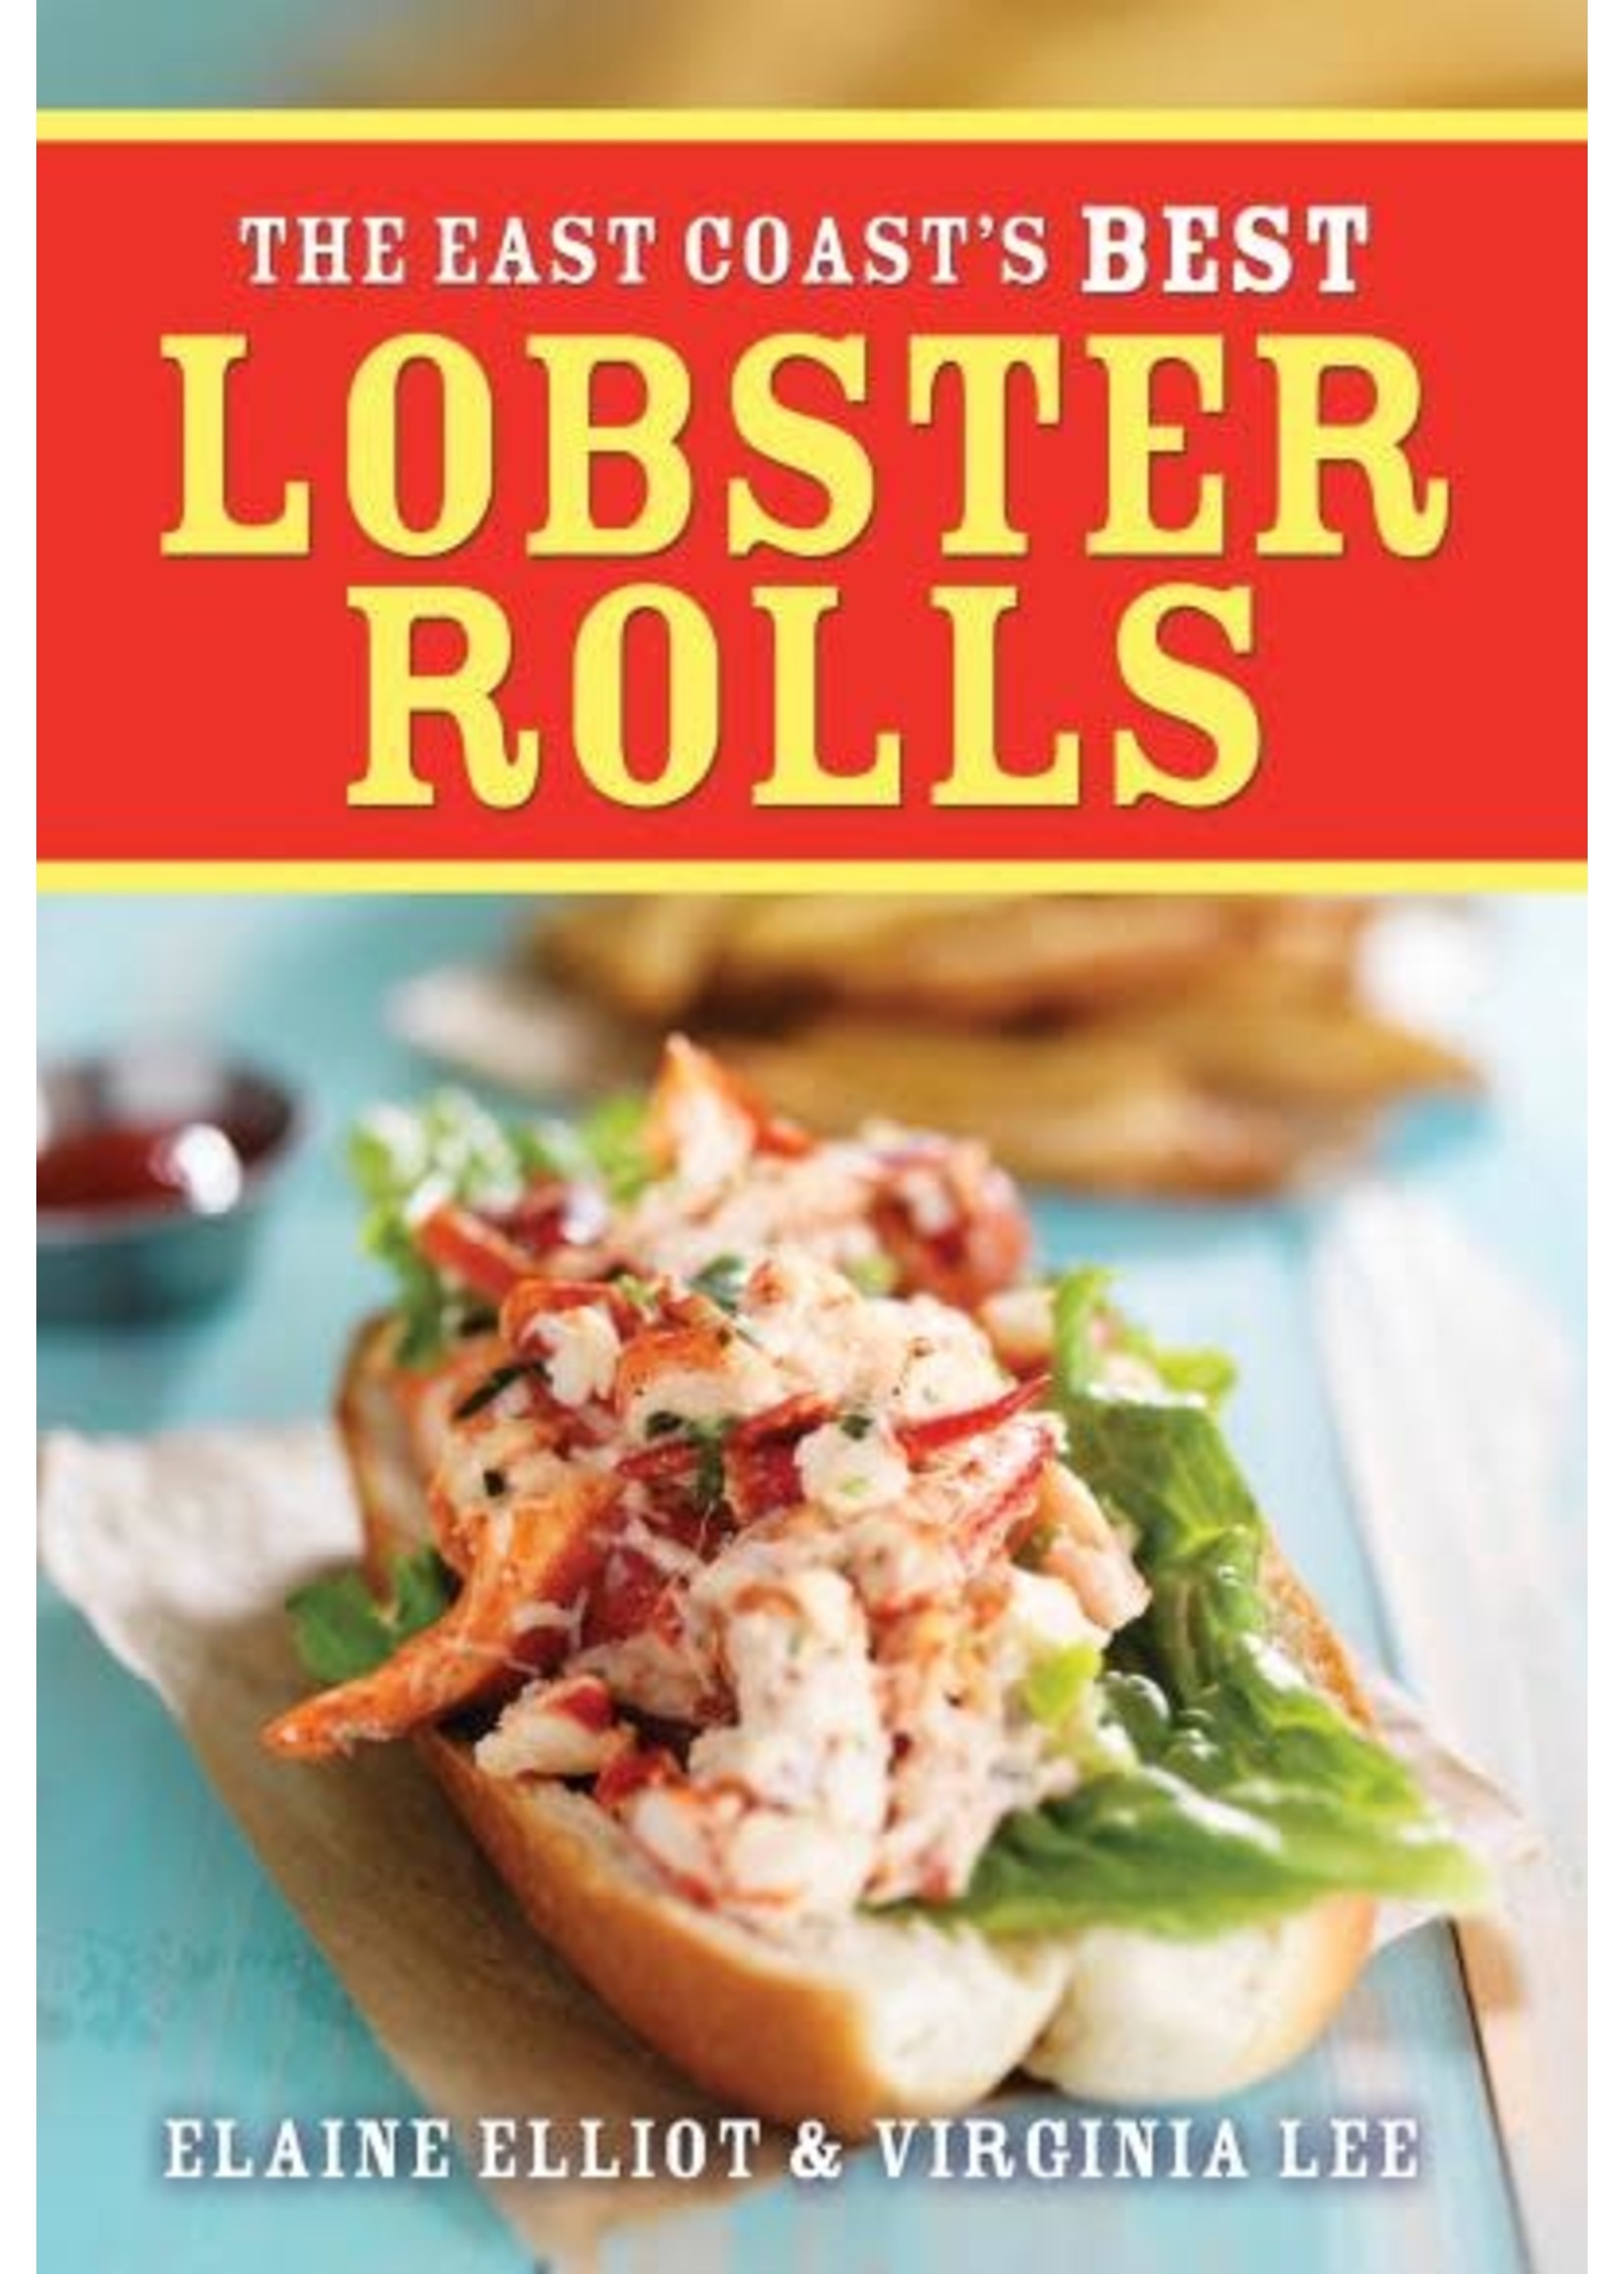 The East Coast's Best Lobster Rolls: Plus Tacos, Pizza and Side Dishes by Elaine Elliot, Virginia Lee